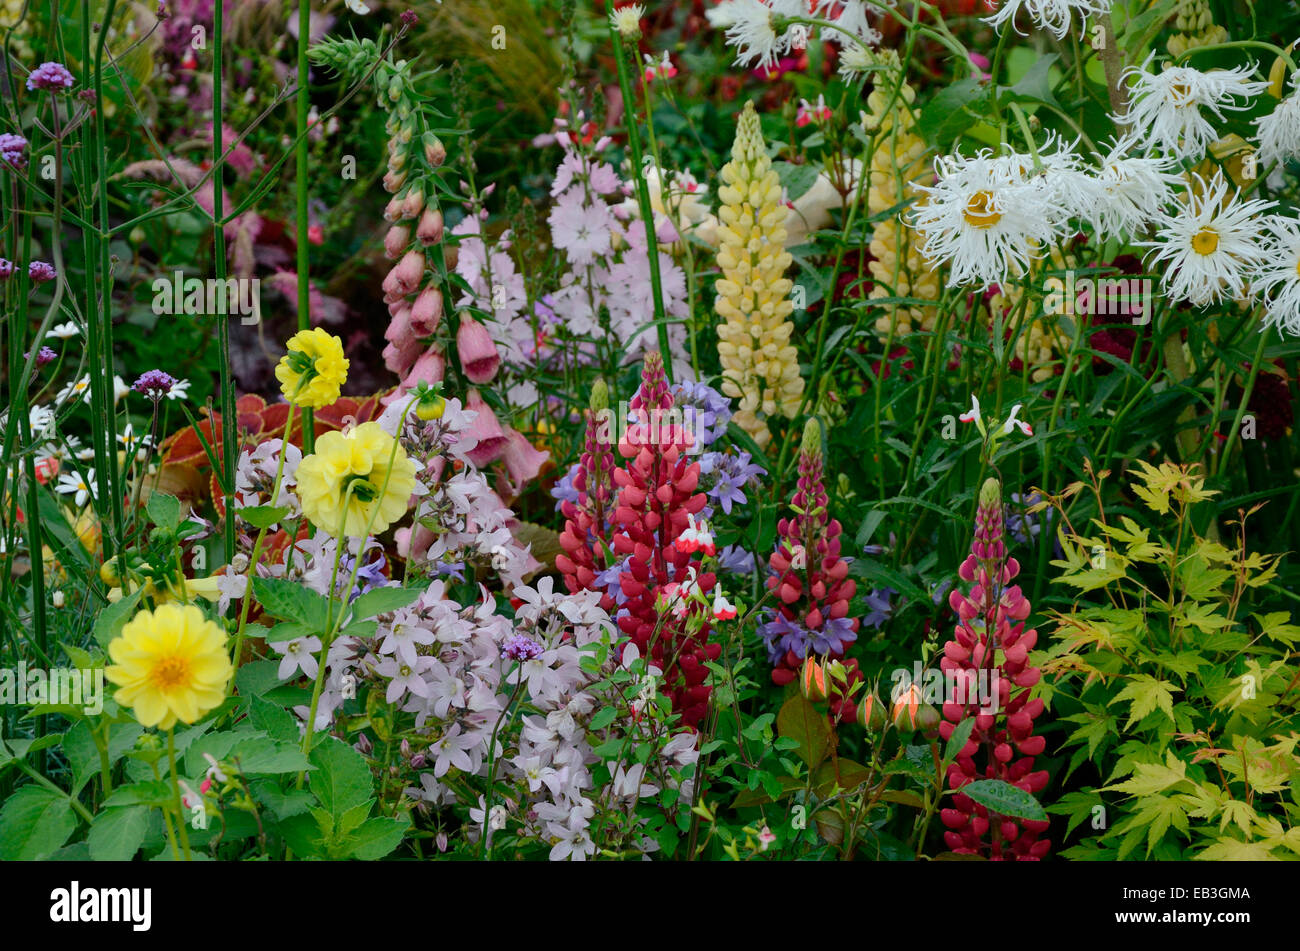 A colourful border with wild planting of mixed flowers including Lupins and Shasta daisy Stock Photo